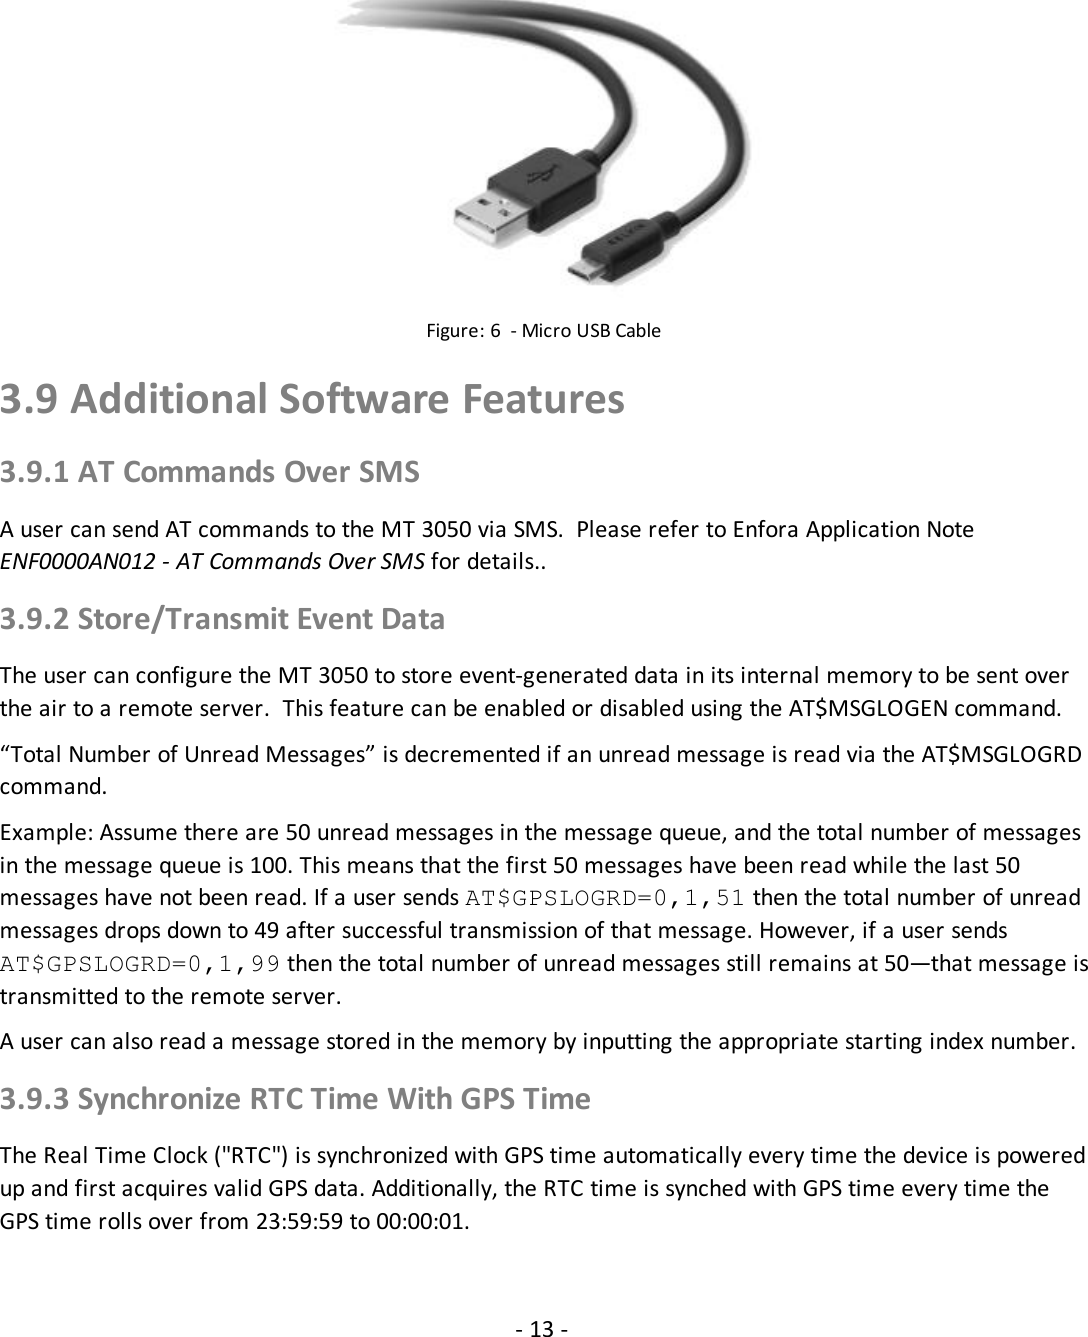 - 13 -Figure: 6 - Micro USB Cable3.9 Additional Software Features3.9.1 AT Commands Over SMSA user can send AT commands to the MT 3050 via SMS. Please refer to Enfora Application NoteENF0000AN012 - AT Commands Over SMS for details..3.9.2 Store/Transmit Event DataThe user can configure the MT 3050 to store event-generated data in its internal memory to be sent overthe air to a remote server. This feature can be enabled or disabled using the AT$MSGLOGEN command.“Total Number of Unread Messages” is decremented if an unread message is read via the AT$MSGLOGRDcommand.Example: Assume there are 50 unread messages in the message queue, and the total number of messagesin the message queue is 100. This means that the first 50 messages have been read while the last 50messages have not been read. If a user sends AT$GPSLOGRD=0,1,51 then the total number of unreadmessages drops down to 49 after successful transmission of that message. However, if a user sendsAT$GPSLOGRD=0,1,99 then the total number of unread messages still remains at 50—that message istransmitted to the remote server.A user can also read a message stored in the memory by inputting the appropriate starting index number.3.9.3 Synchronize RTC Time With GPS TimeThe Real Time Clock (&quot;RTC&quot;) is synchronized with GPS time automatically every time the device is poweredup and first acquires valid GPS data. Additionally, the RTC time is synched with GPS time every time theGPS time rolls over from 23:59:59 to 00:00:01.